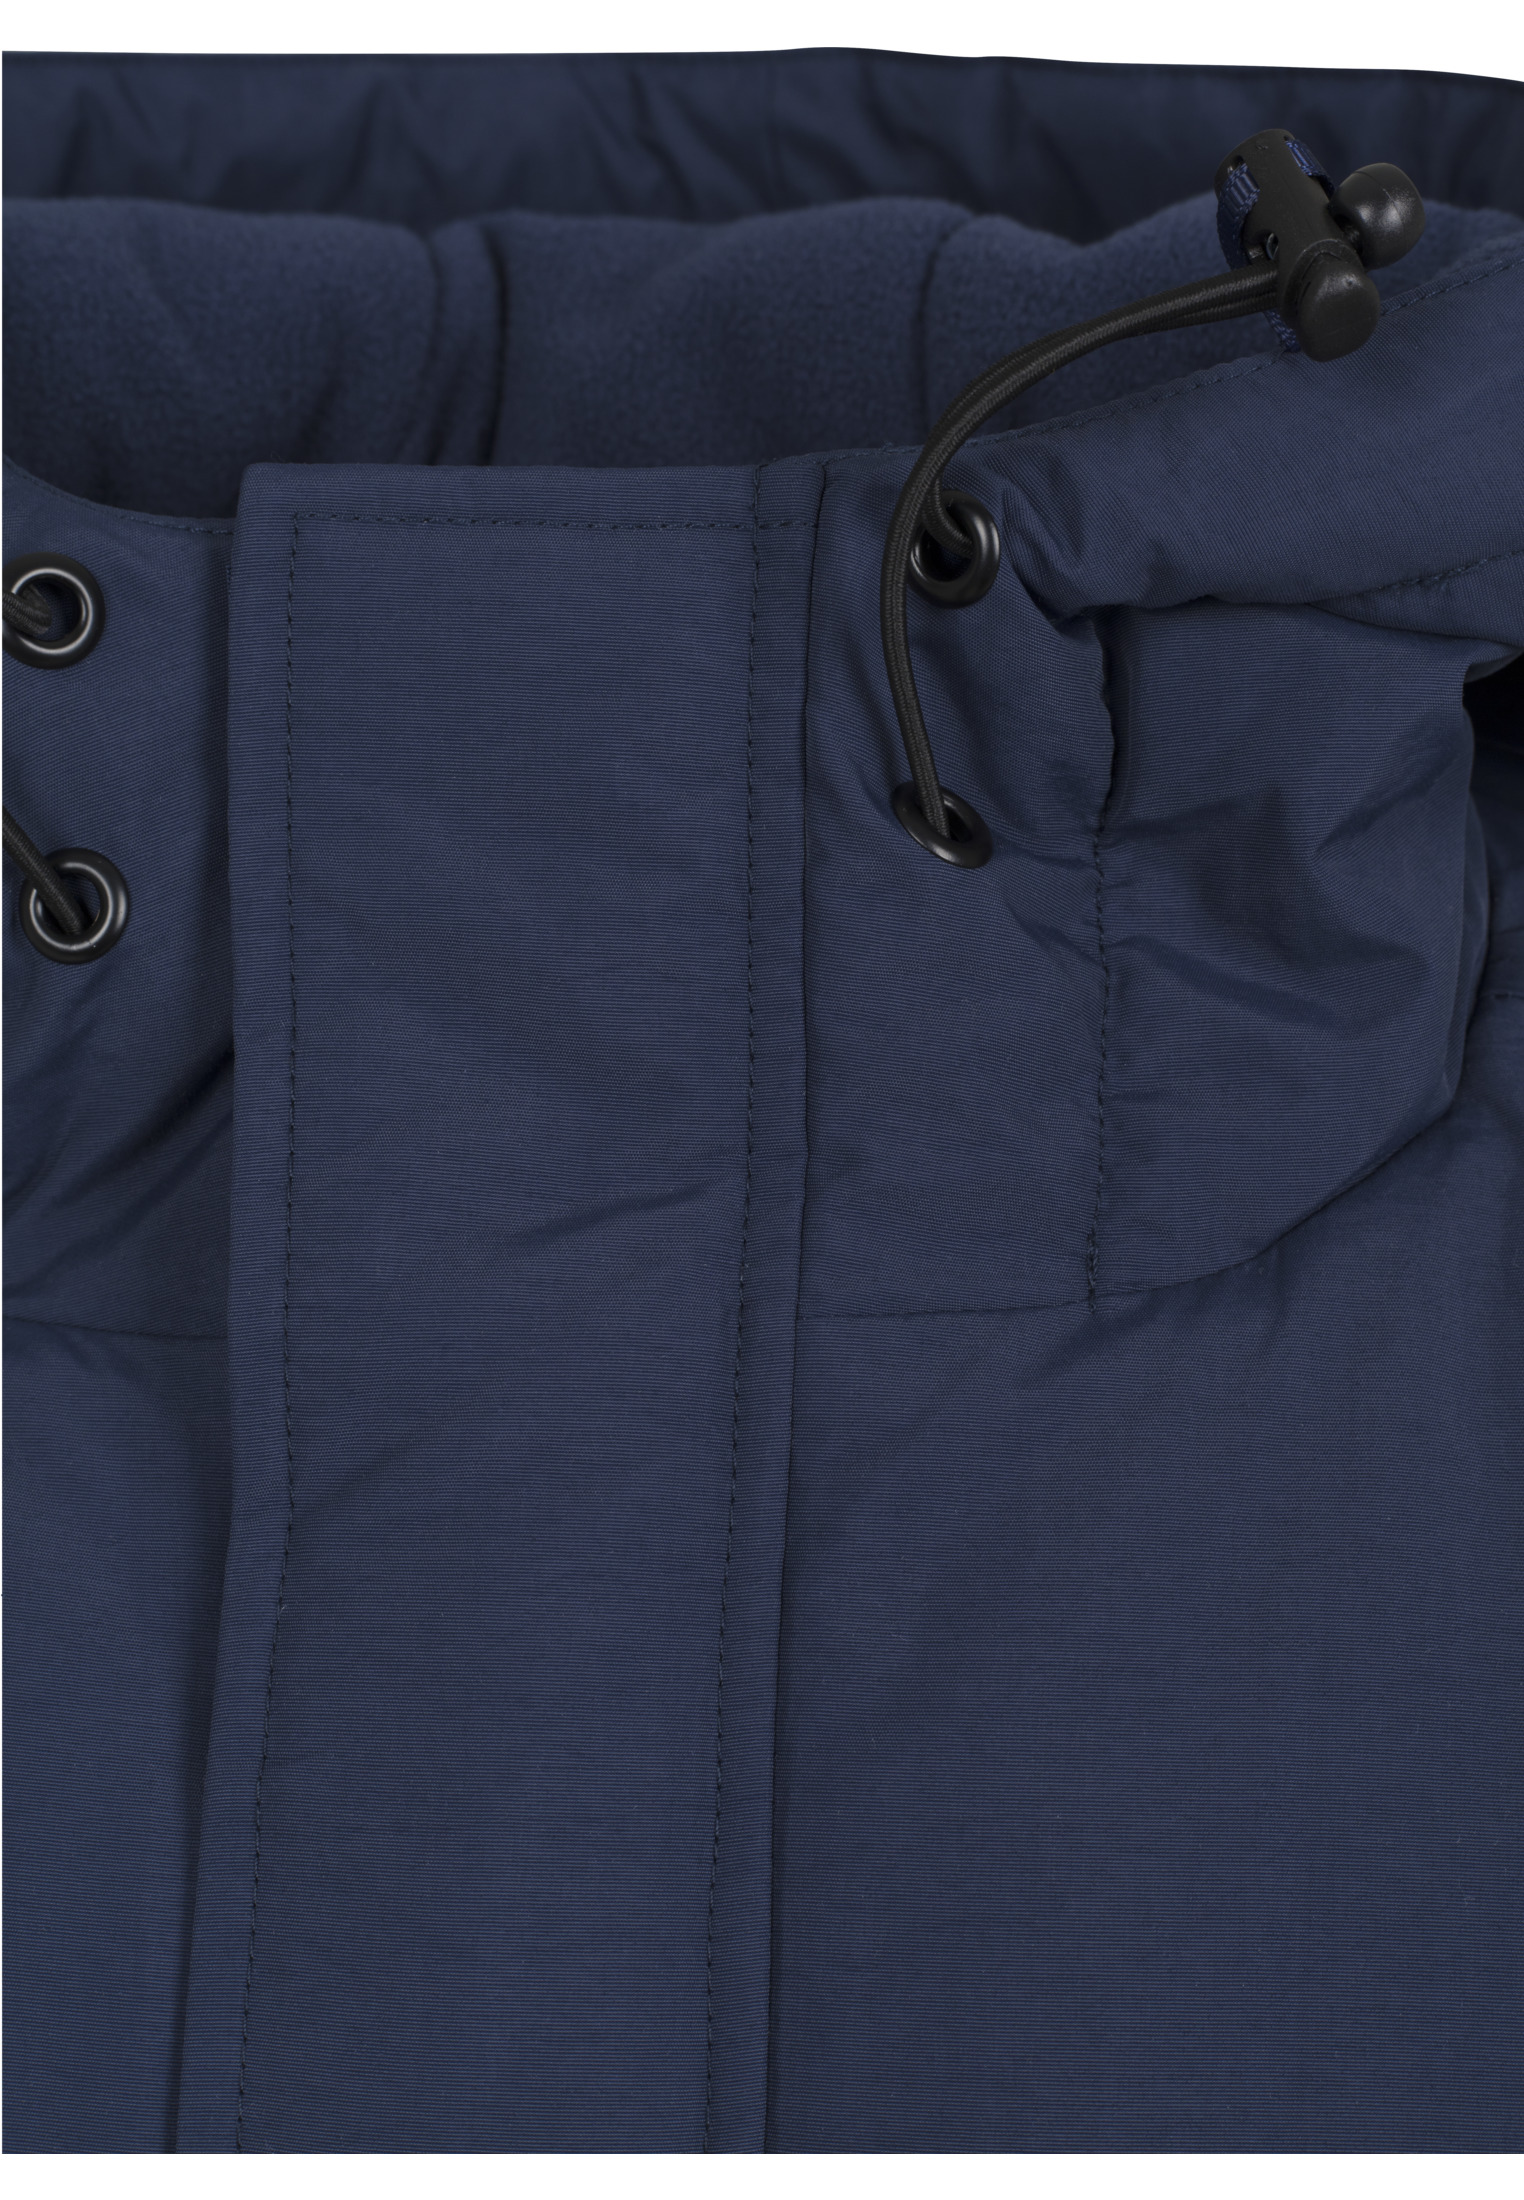 Winter Jacken Padded Pull Over Jacket in Farbe navy